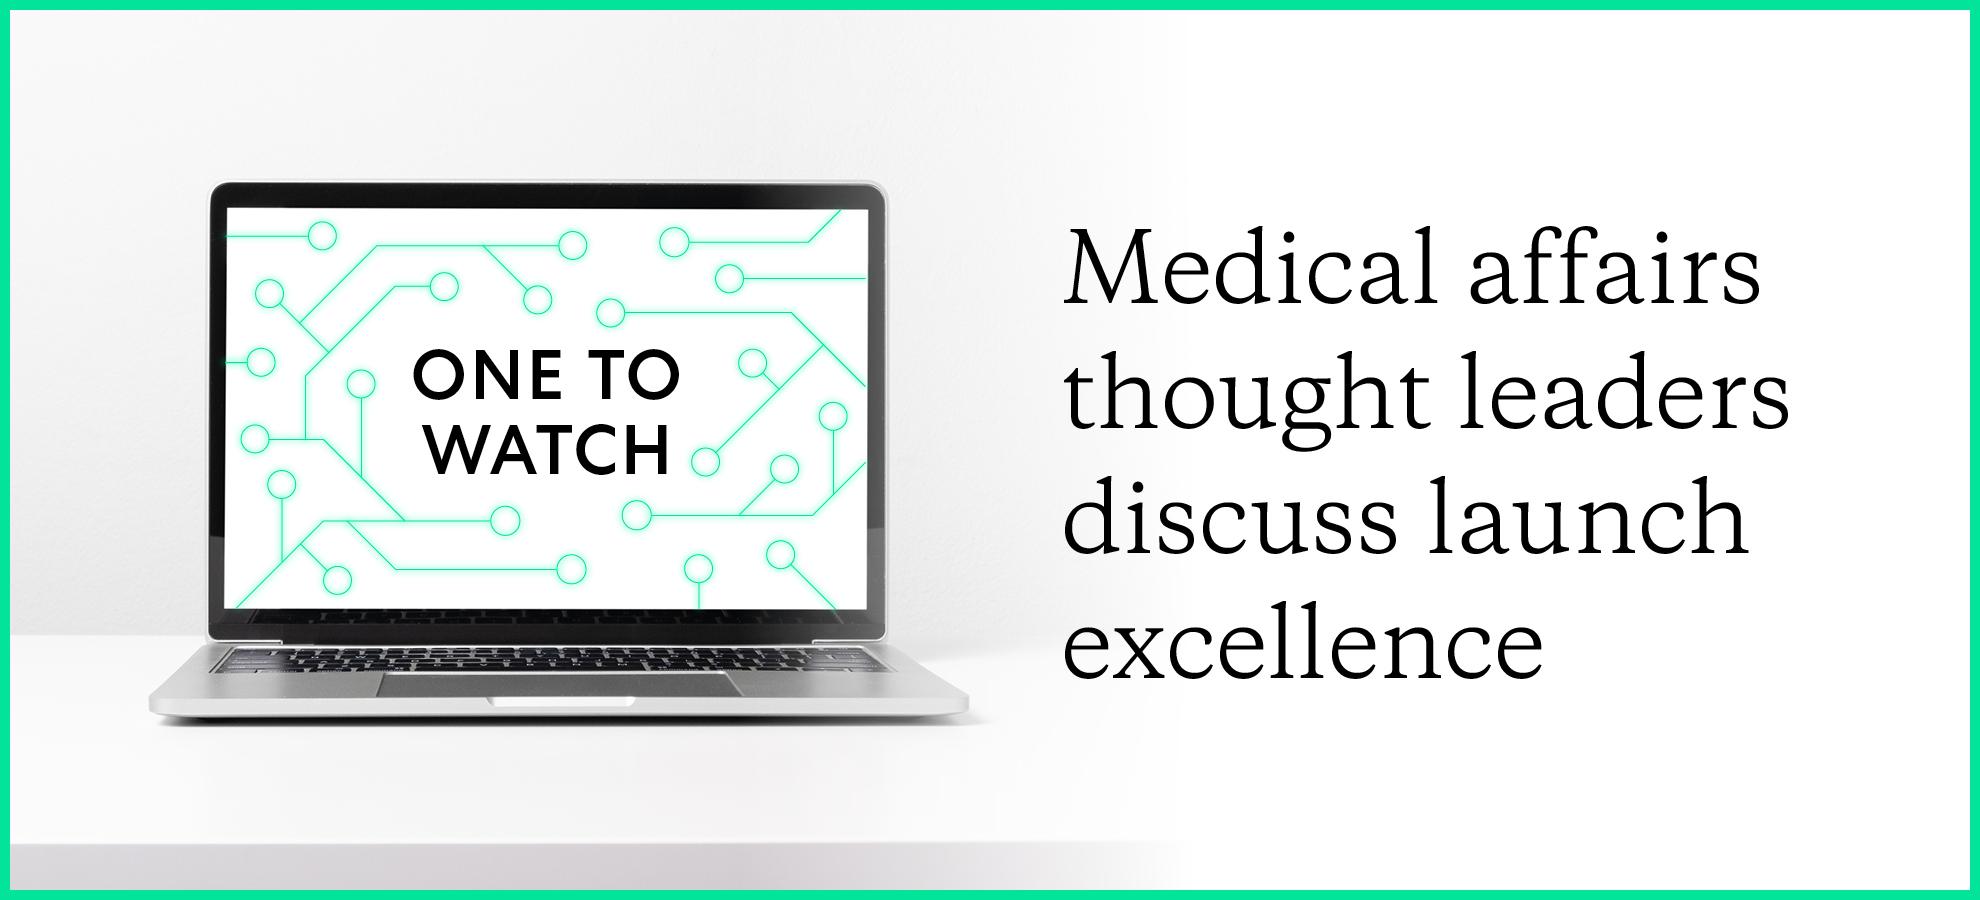 One to watch: medical affairs thought leaders discuss launch excellence